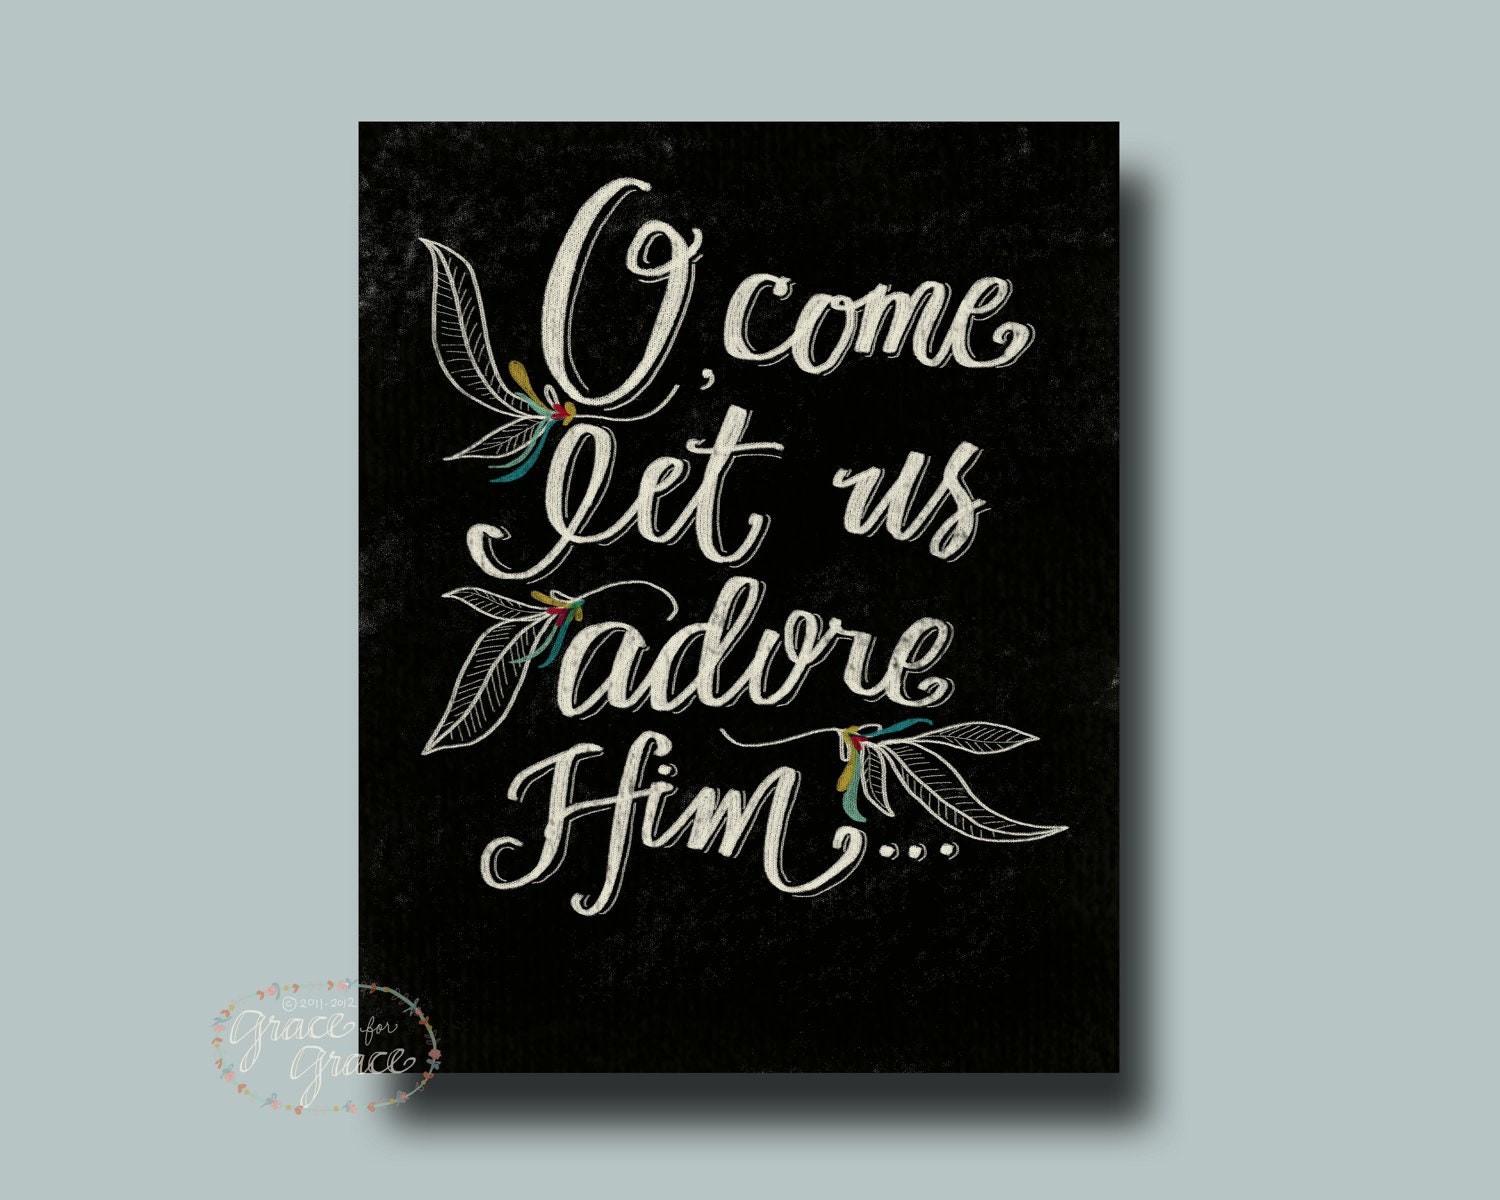 Bible Verse Art- O Come Let Us Adore Him - 8x10 Giclee Print - Christmas Print, Black and White, Typography by Grace for Grace